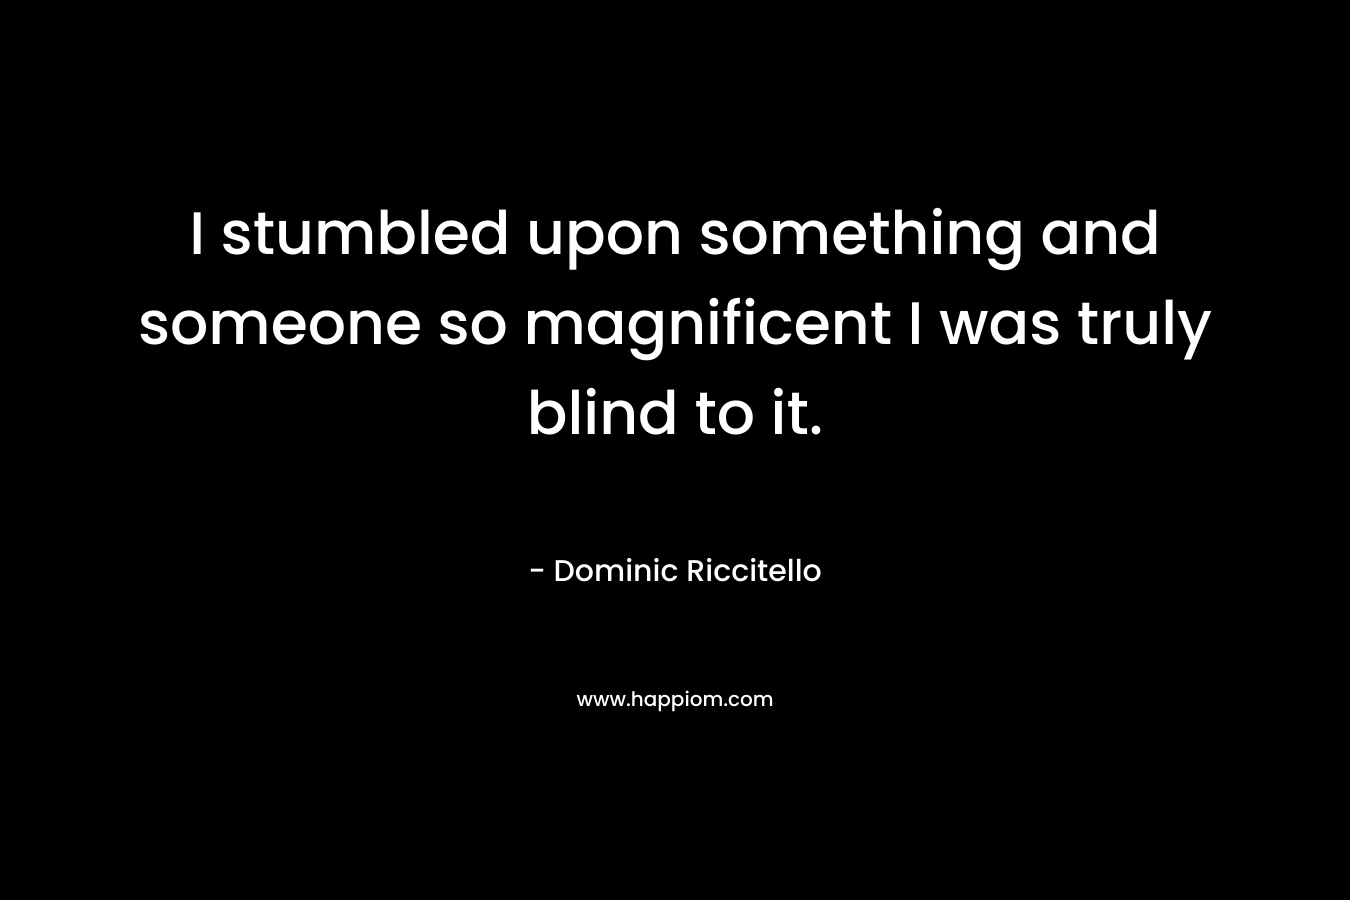 I stumbled upon something and someone so magnificent I was truly blind to it. – Dominic Riccitello